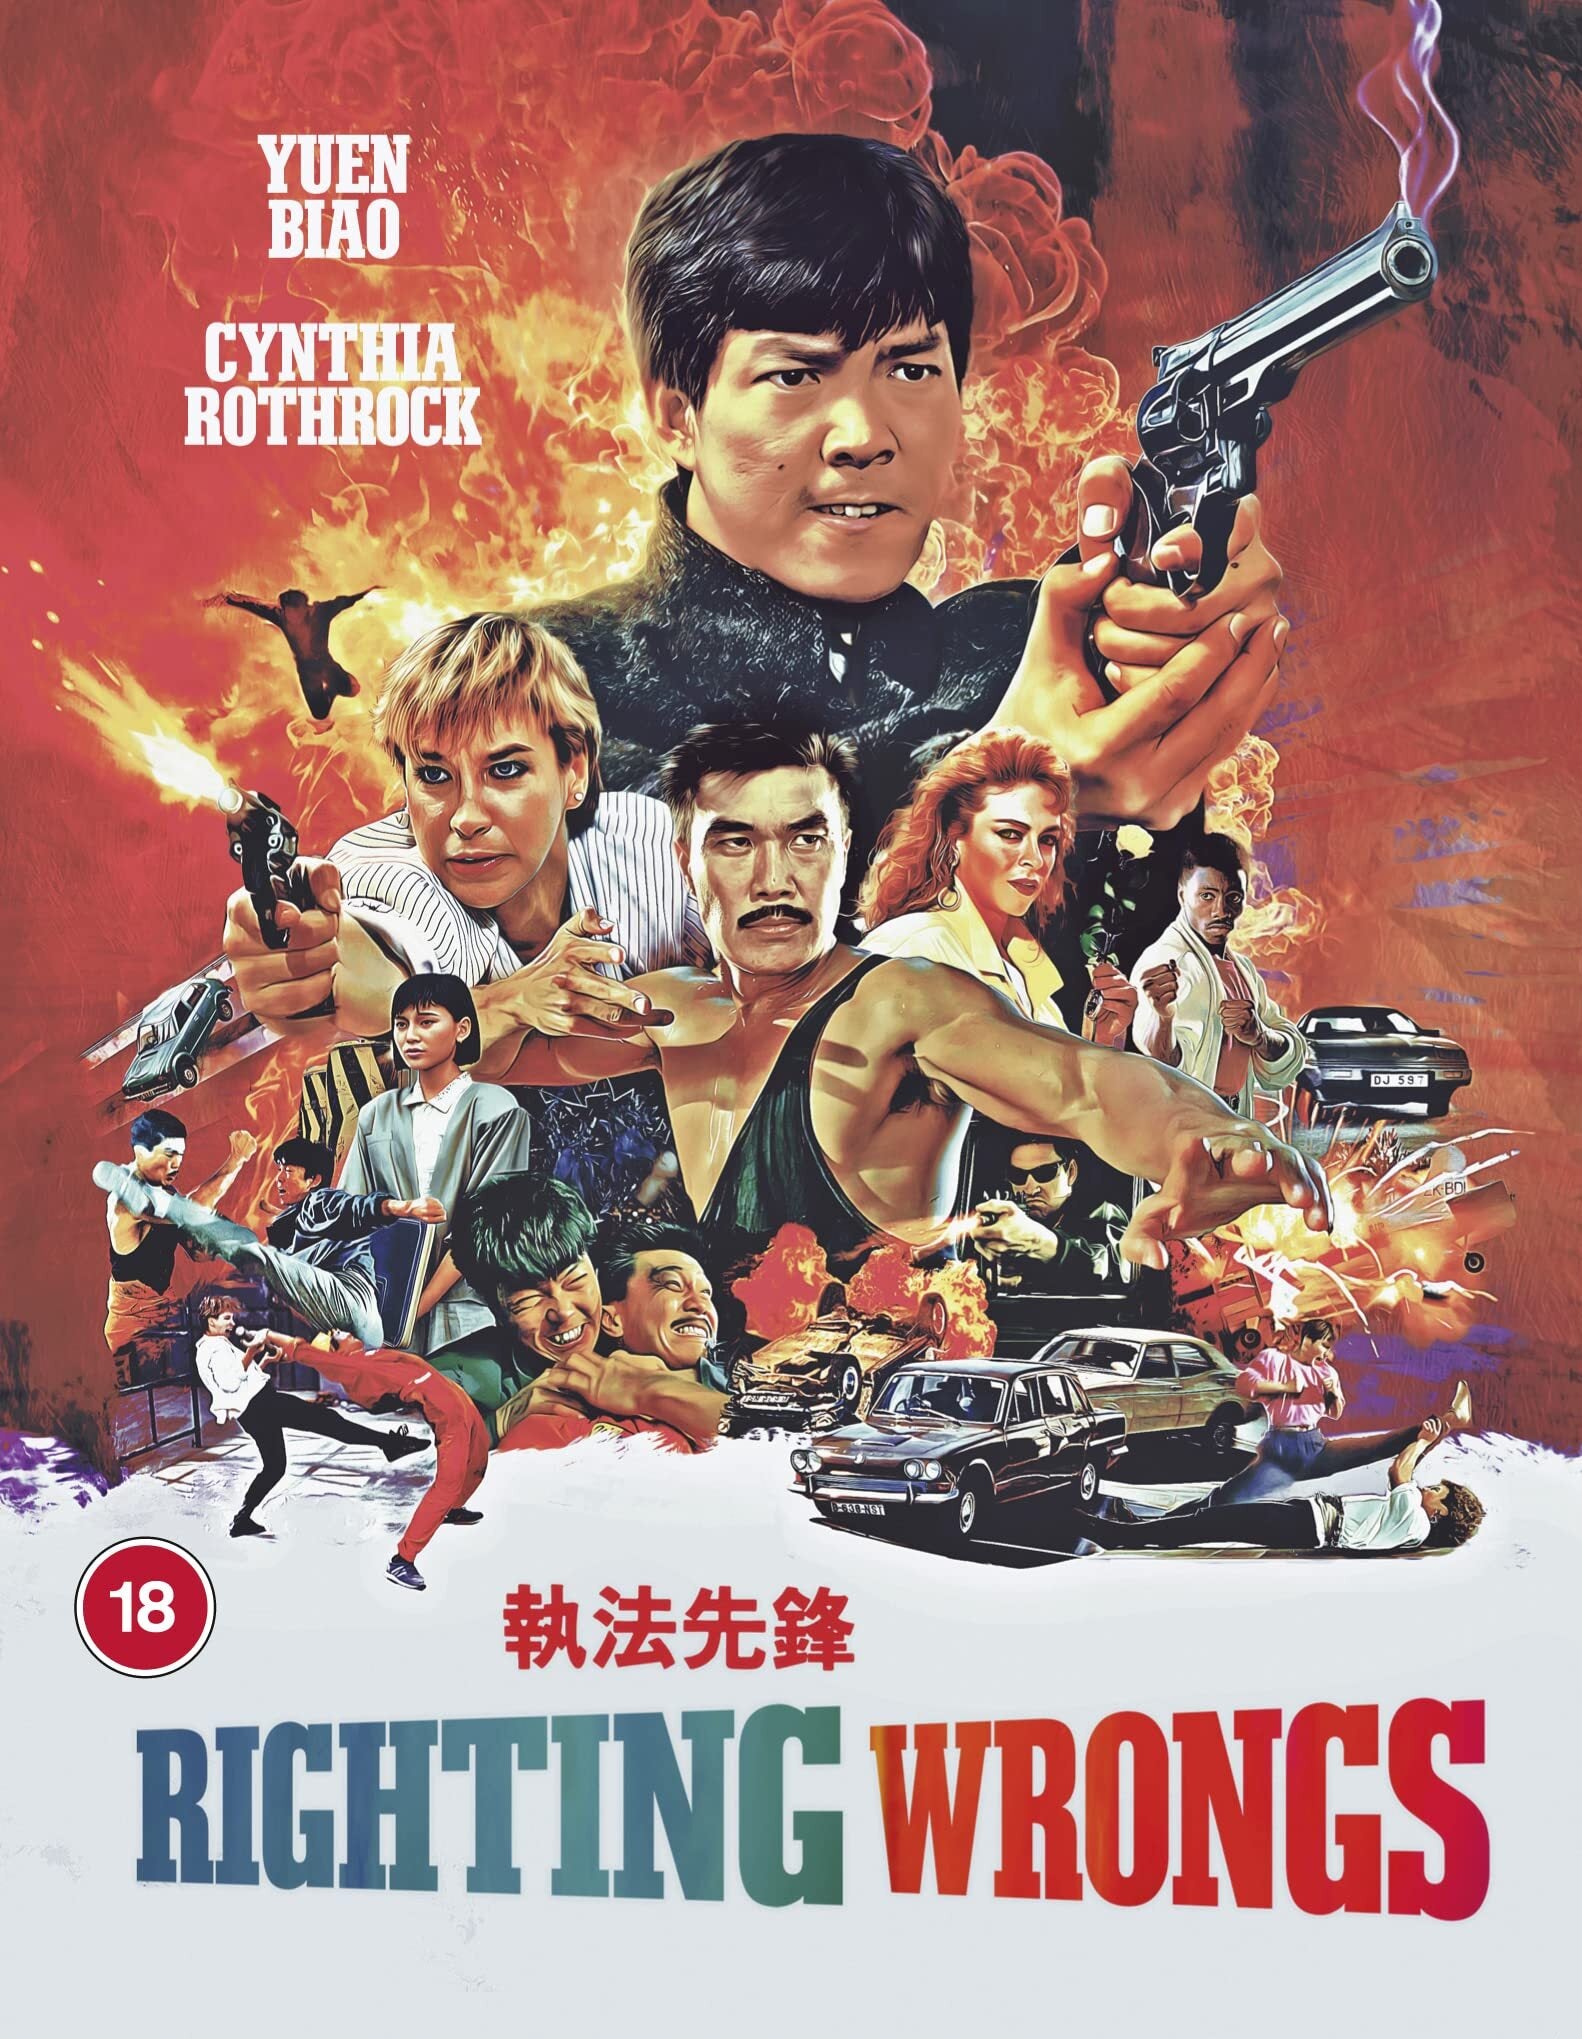 RIGHTING WRONGS (REGION B IMPORT - LIMITED EDITION) BLU-RAY